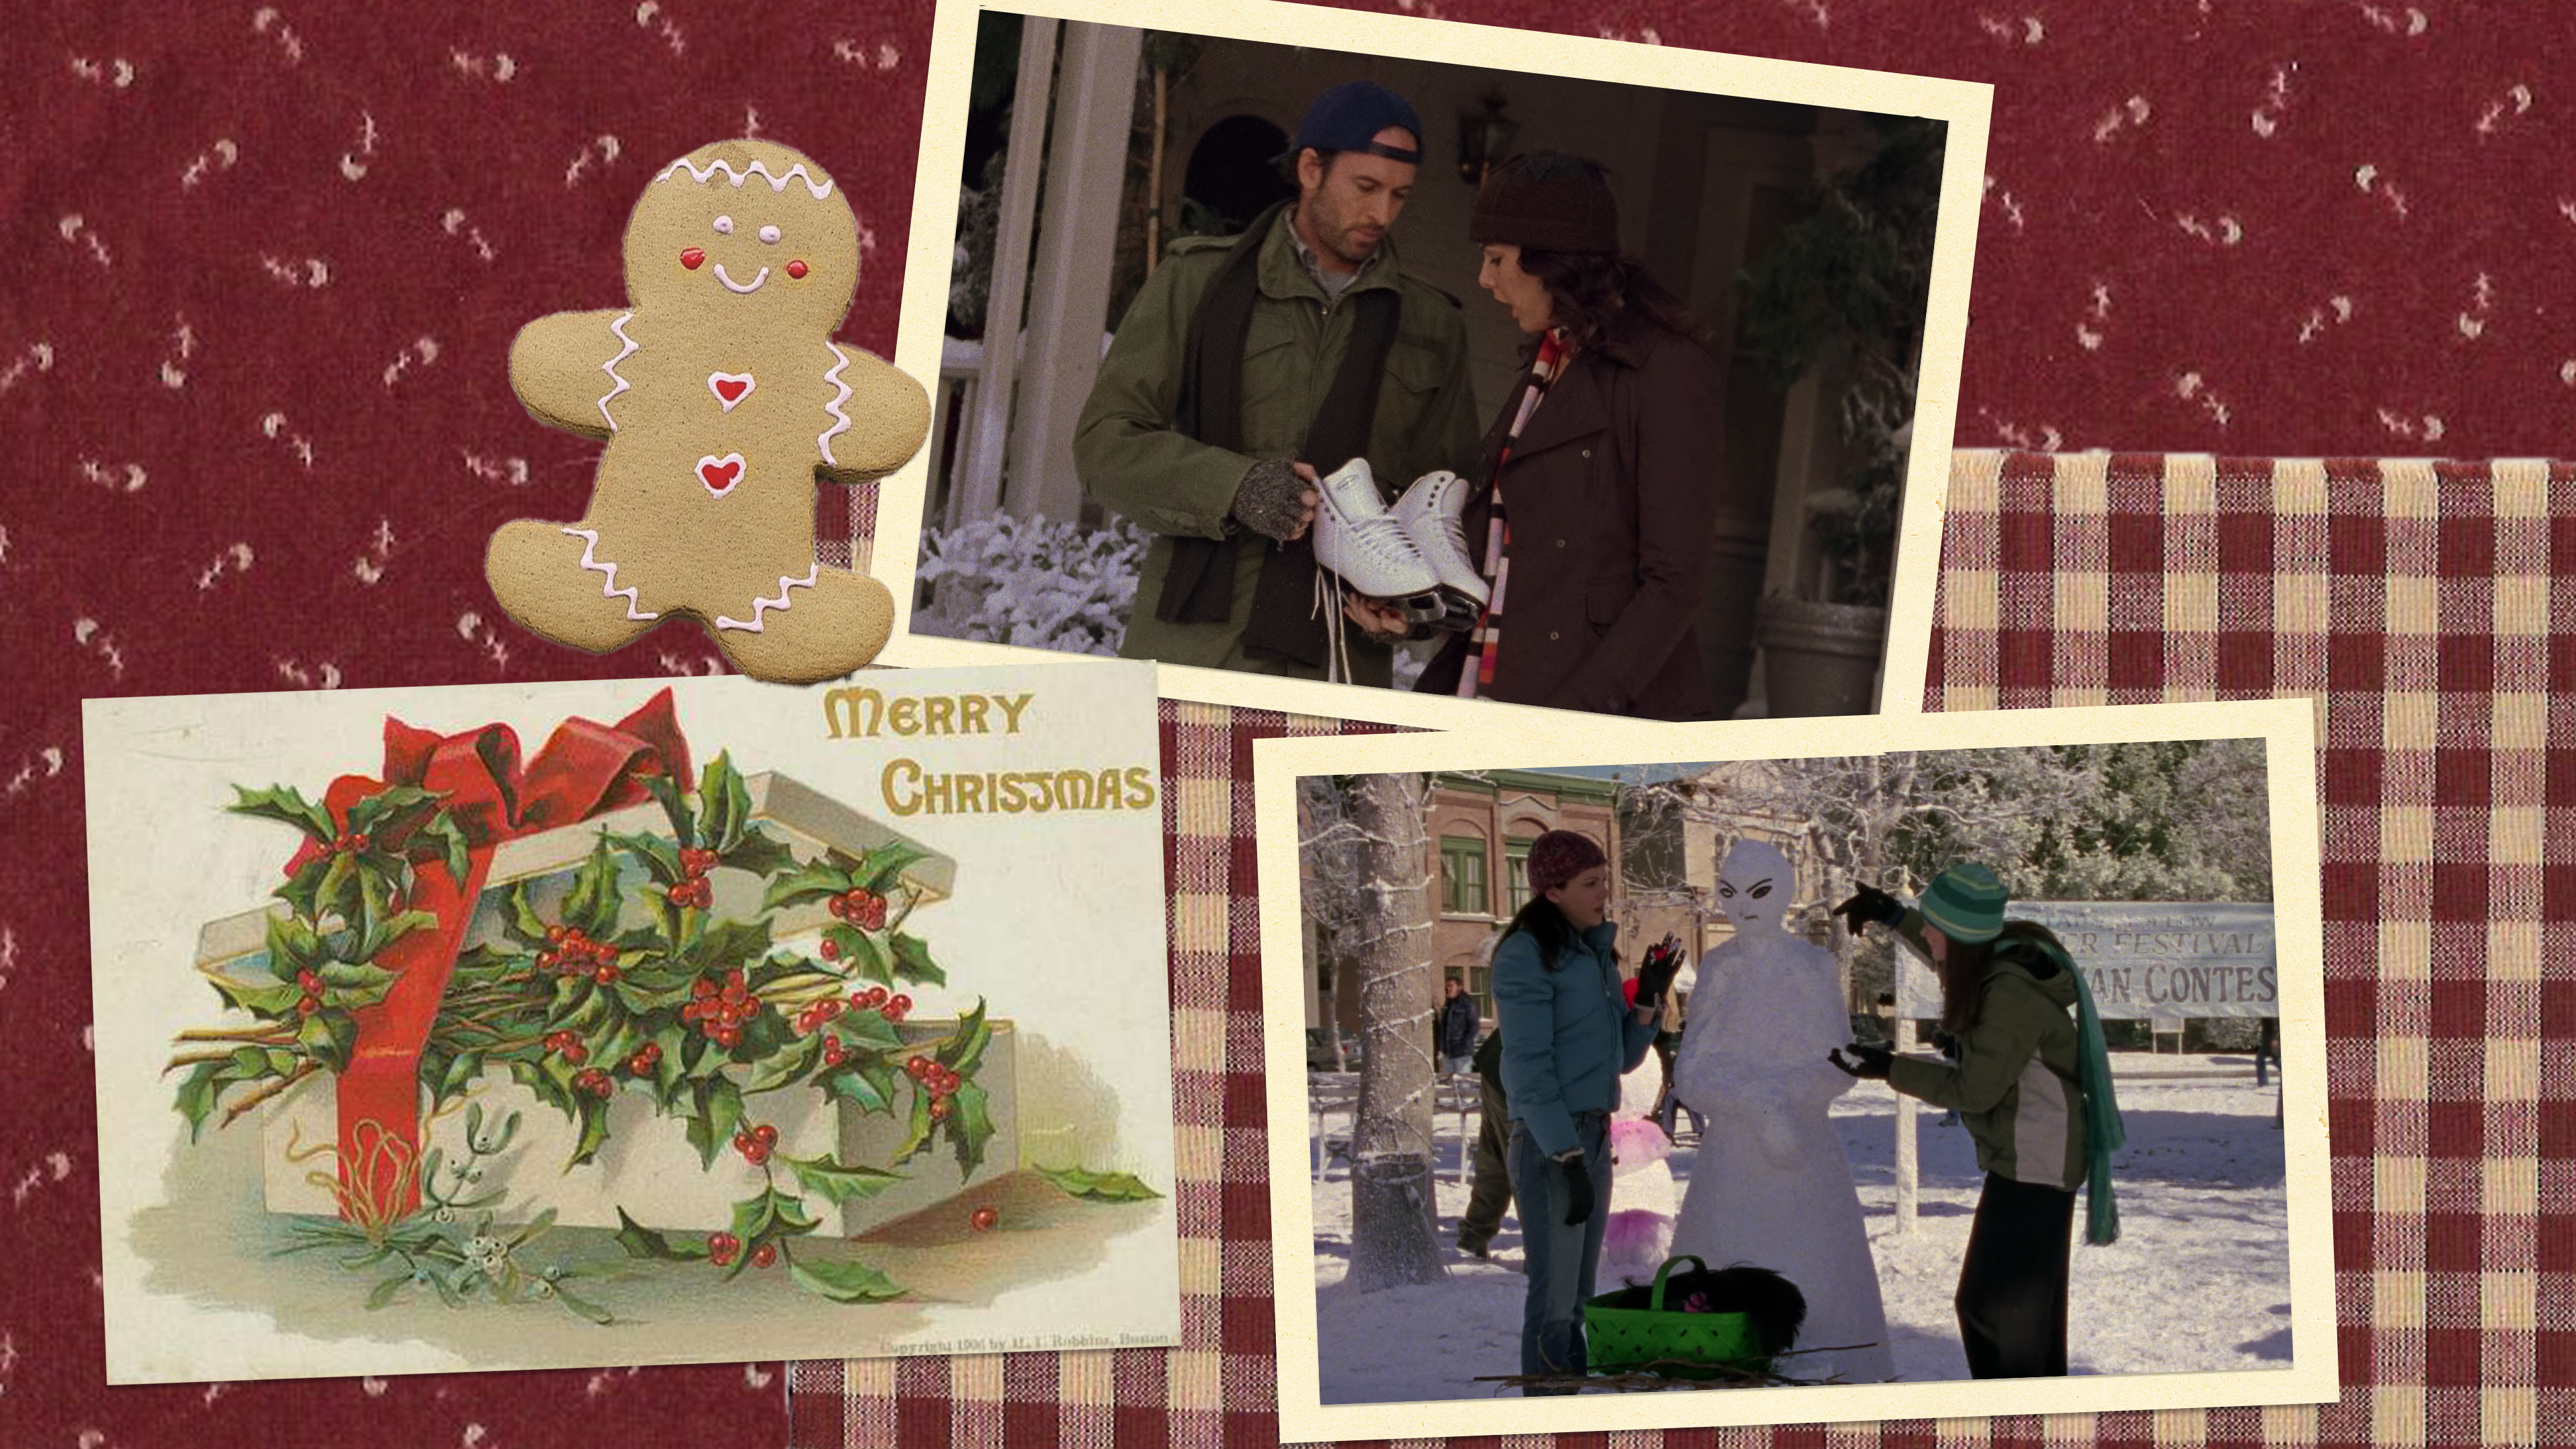 Scenes from "Gilmore Girls" holiday episodes surrounded by holiday garb.